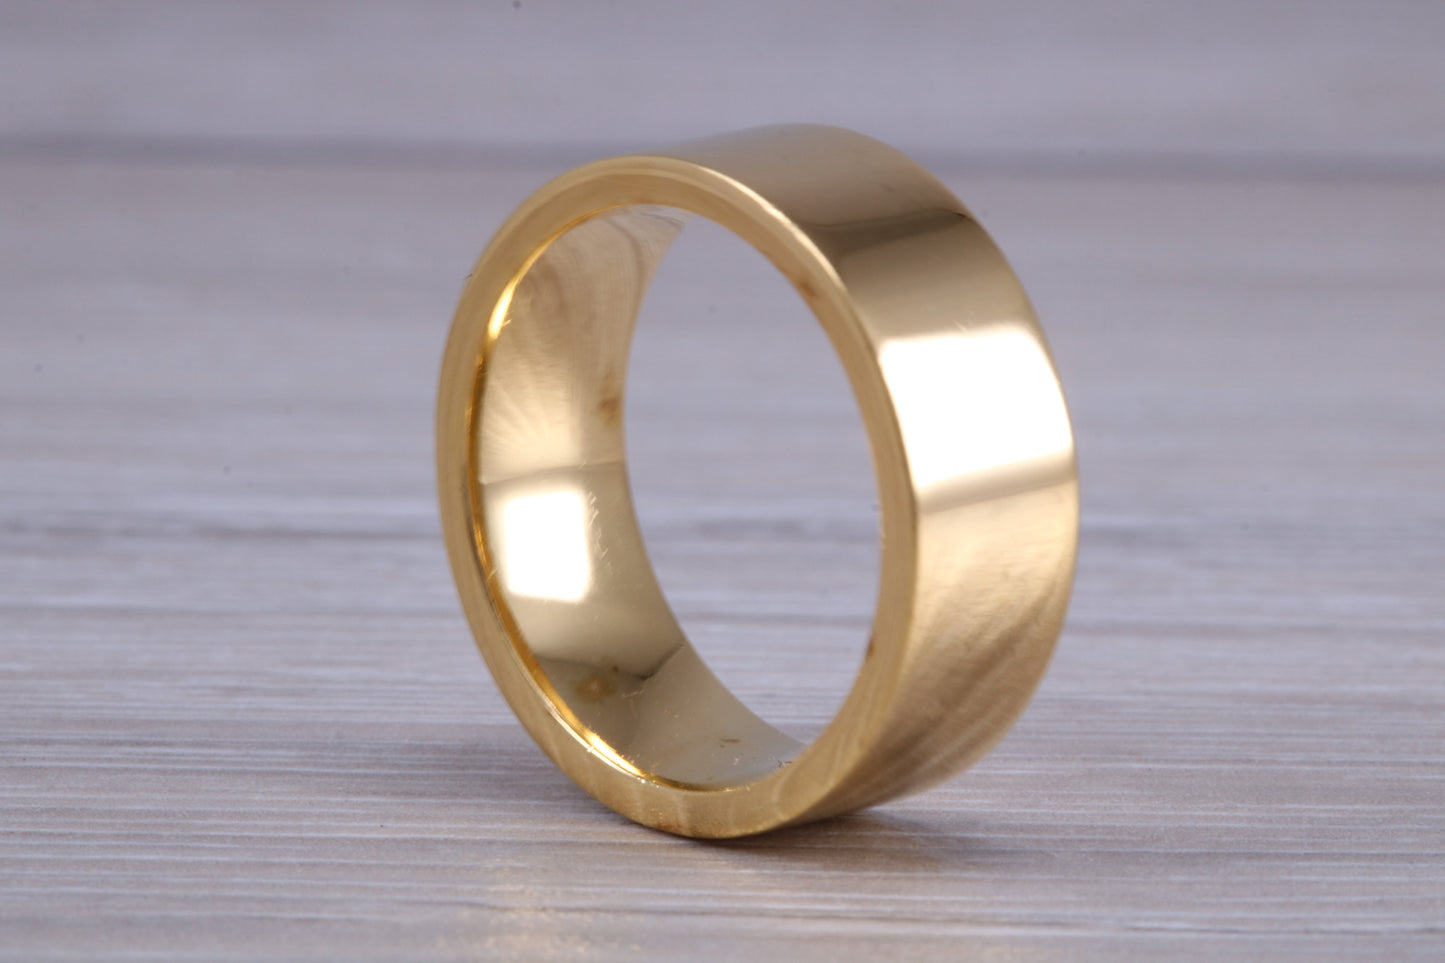 10 mm flat profile Silver band with 18ct yellow Gold hard plating, looks just like a gold band for a fraction of the cost. Very wide band